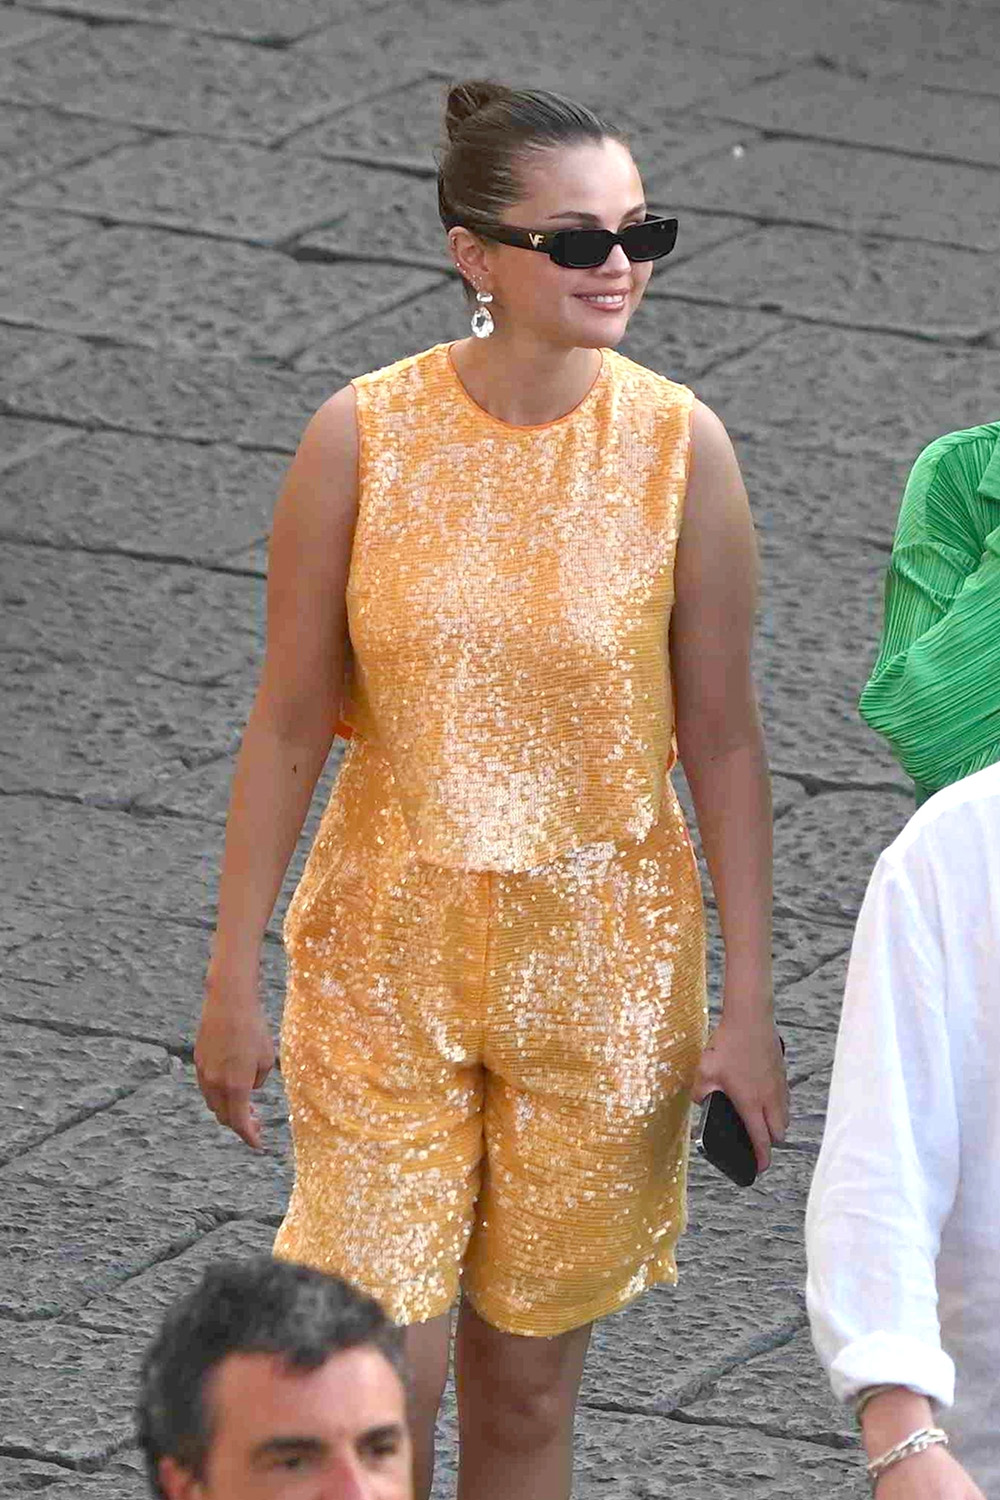 Capri, ITALY - *EXCLUSIVE* - American singer Selena Gomez walks around town browsing the shops while on vacation in Capri, Italy. Selena with her A sequin dress was seen with friends entering the Prada designer boutique, as a rather stylish-looking Italian-Canadian film producer Andrea Iervolino in her suit jacket joined Selena on the shopping spree. USA AUGUST 5, 2022 BYLINE MUST READ: Cobra Team / BACKGRID USA: +1 310 798 9111 / usasales@backgrid.com UK: +44 208 344 2007 / uksales@backgrid.com *UK Customers - Images containing children Please pixelate face before Publish*